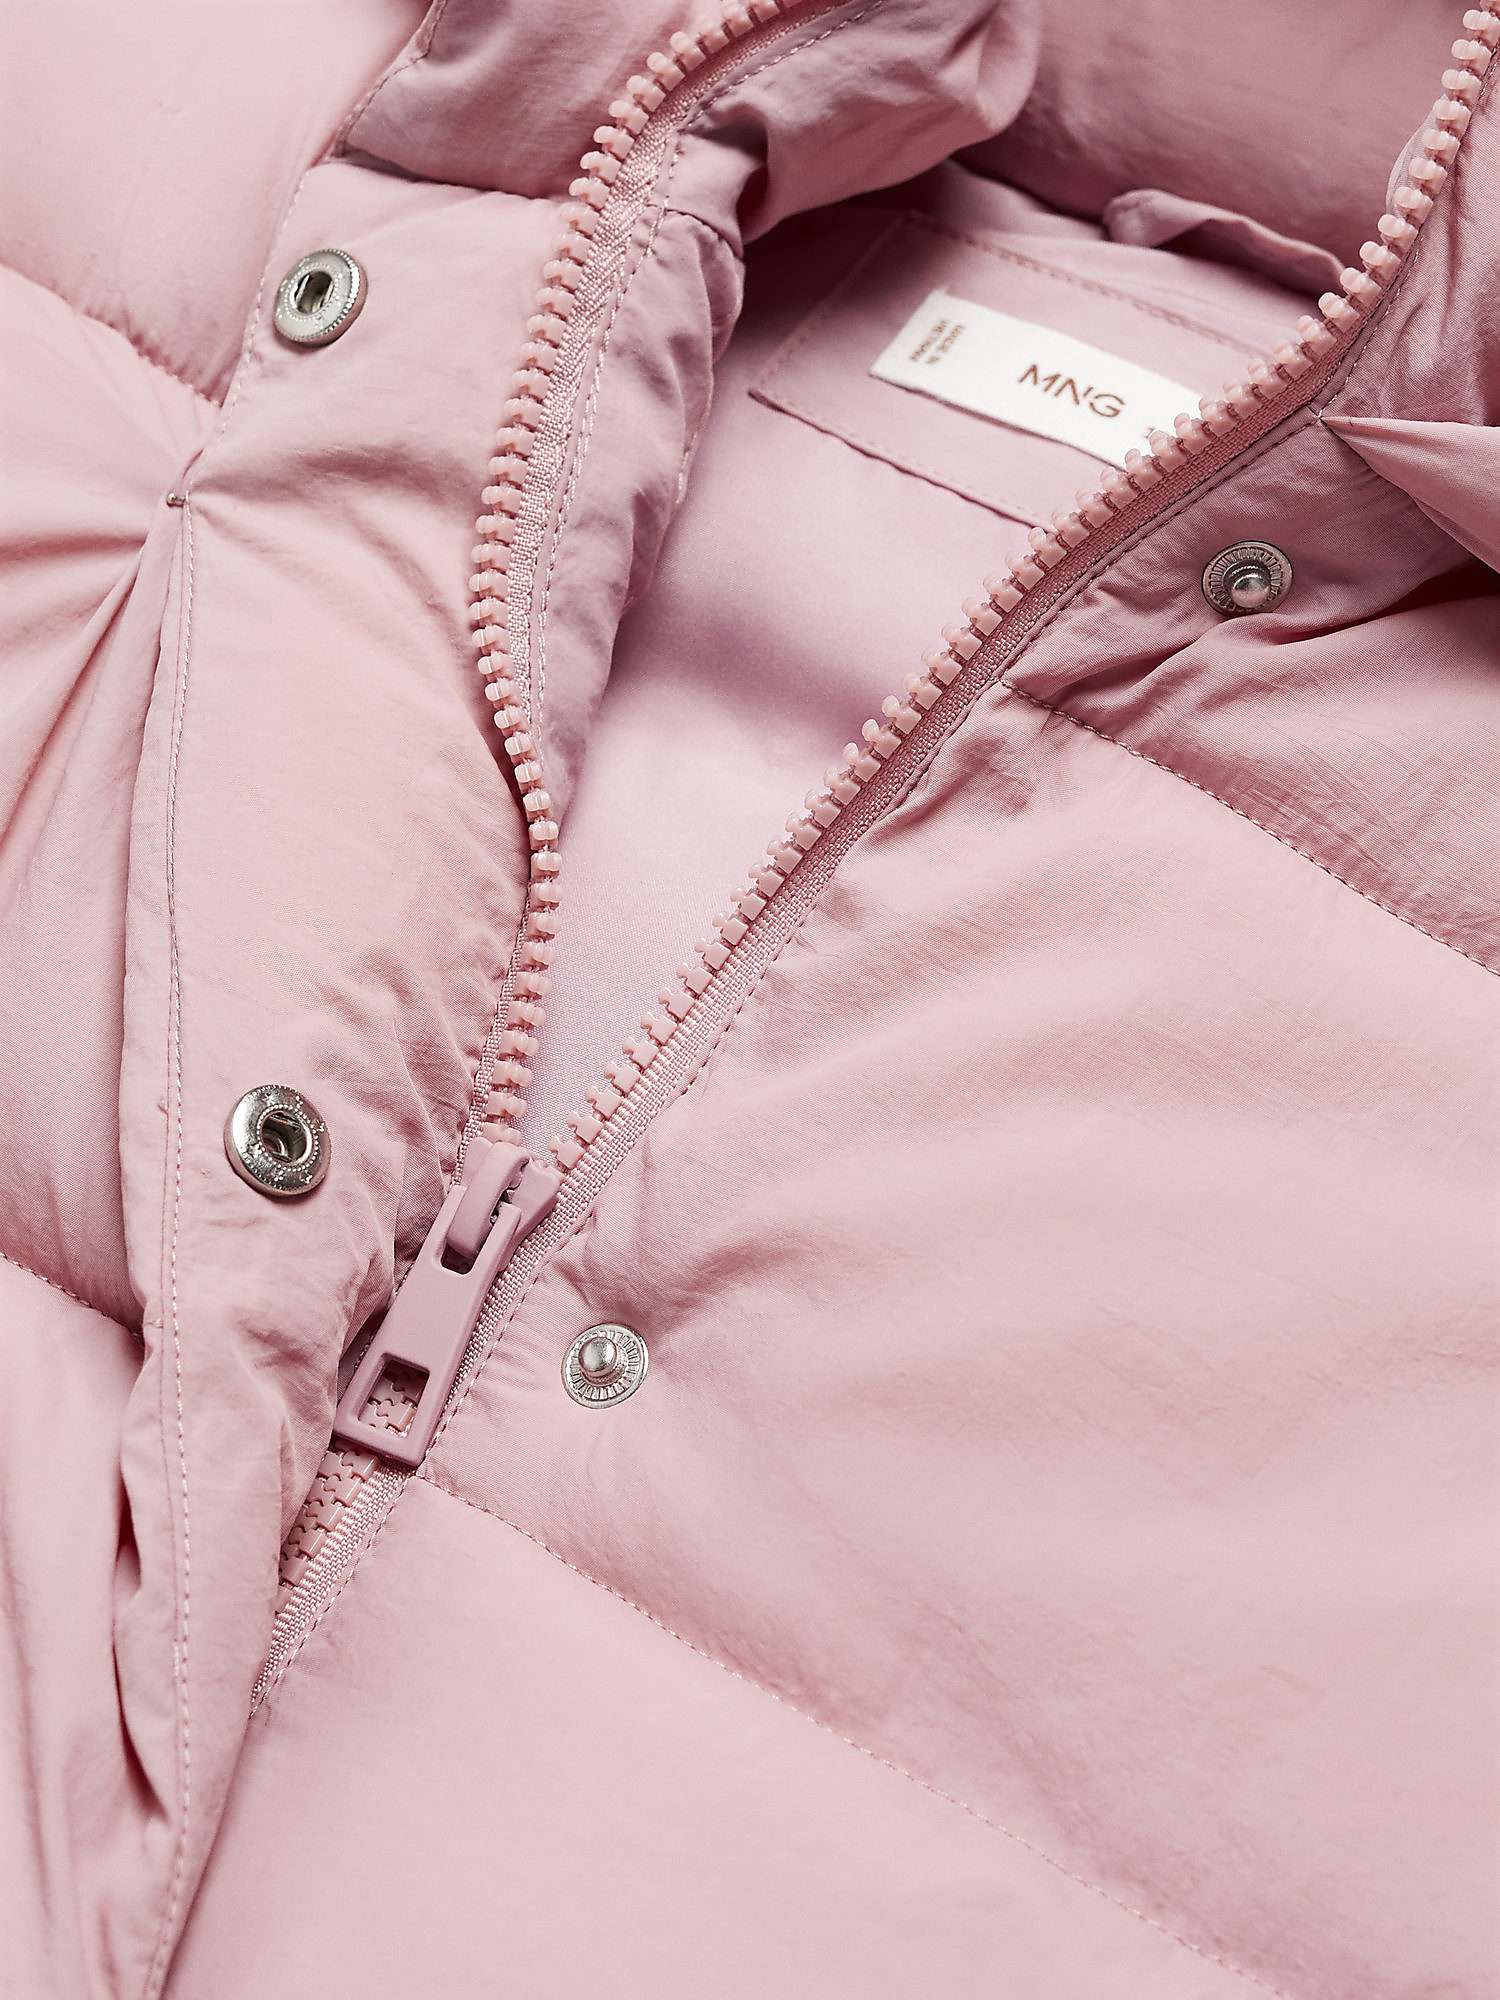 Buy Mango Kids' Mariana Quilted Hooded Gilet Online at johnlewis.com